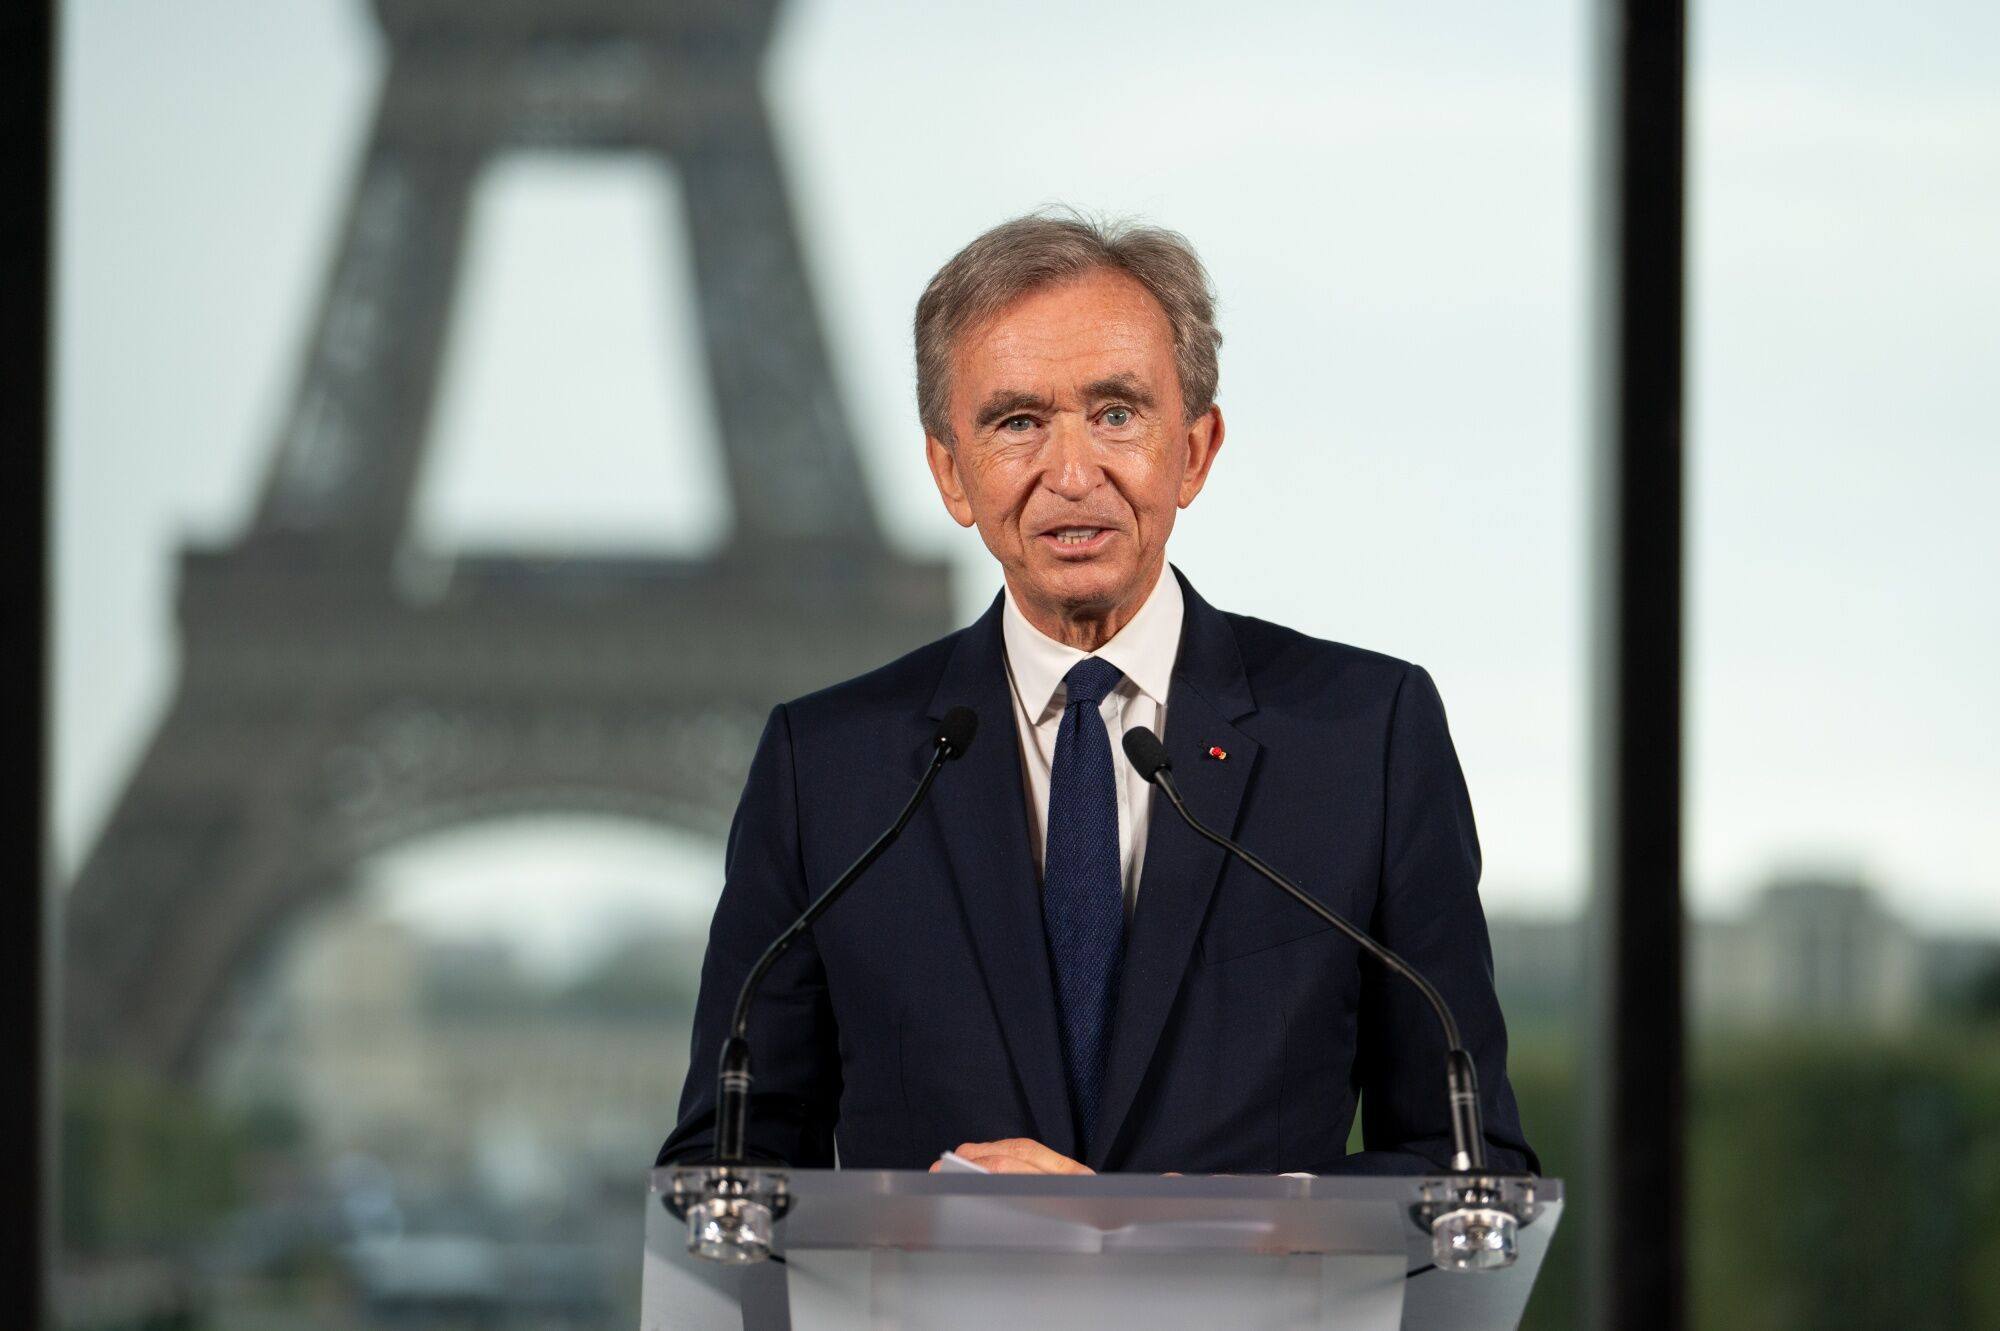 Bernard Arnault, billionaire and chairman of LVMH Moët Hennessy Louis Vuitton SE, during a company news conference in Paris, France, on July 24. Photo: Bloomberg